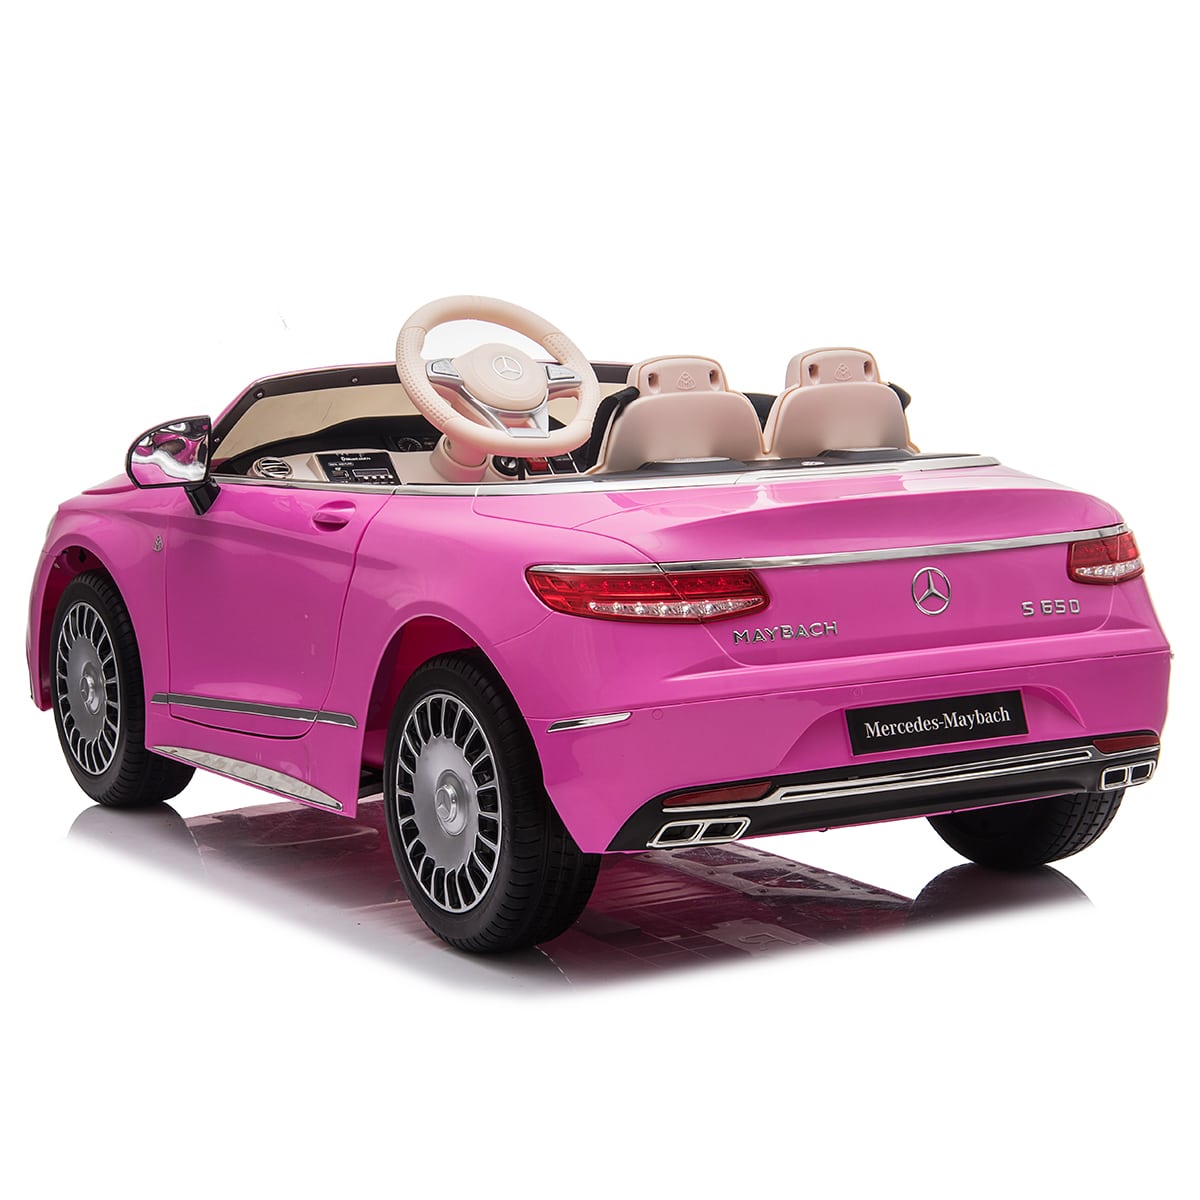 "Pink Mercedes-Benz S650 children's electric ride-on car featuring parental control system"